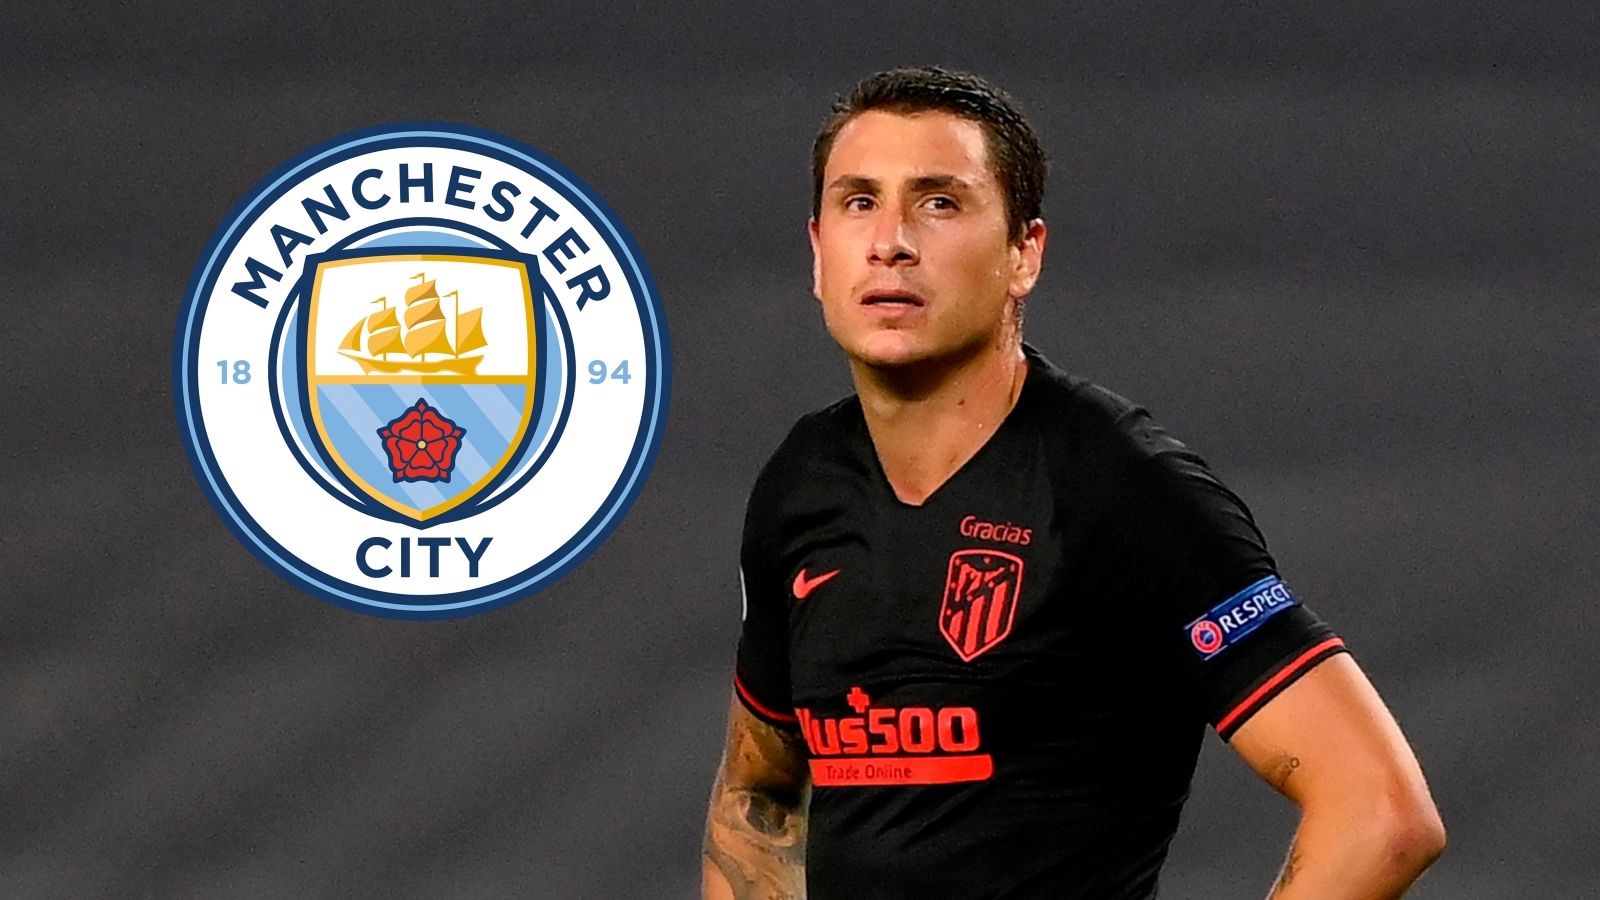 Atletico Madrid reveal Man City's £78m bid for Gimenez but have no plans to sell star defender